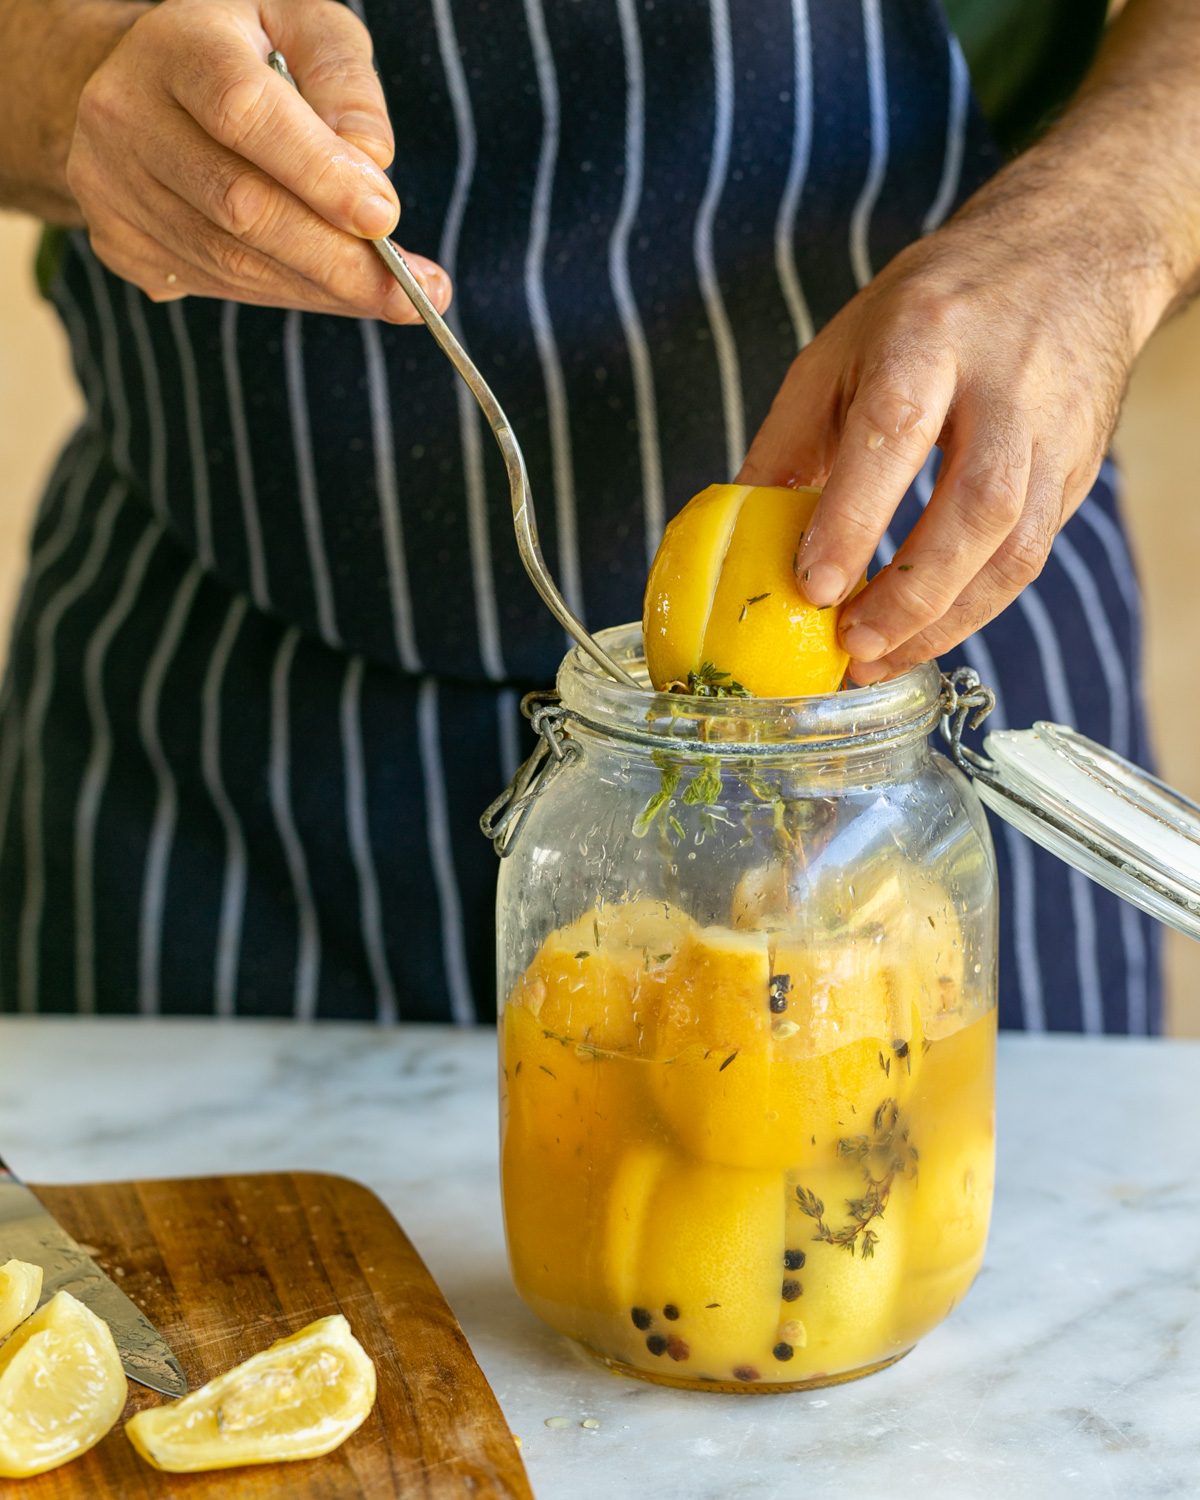 Taking out preserved lemons from the jar